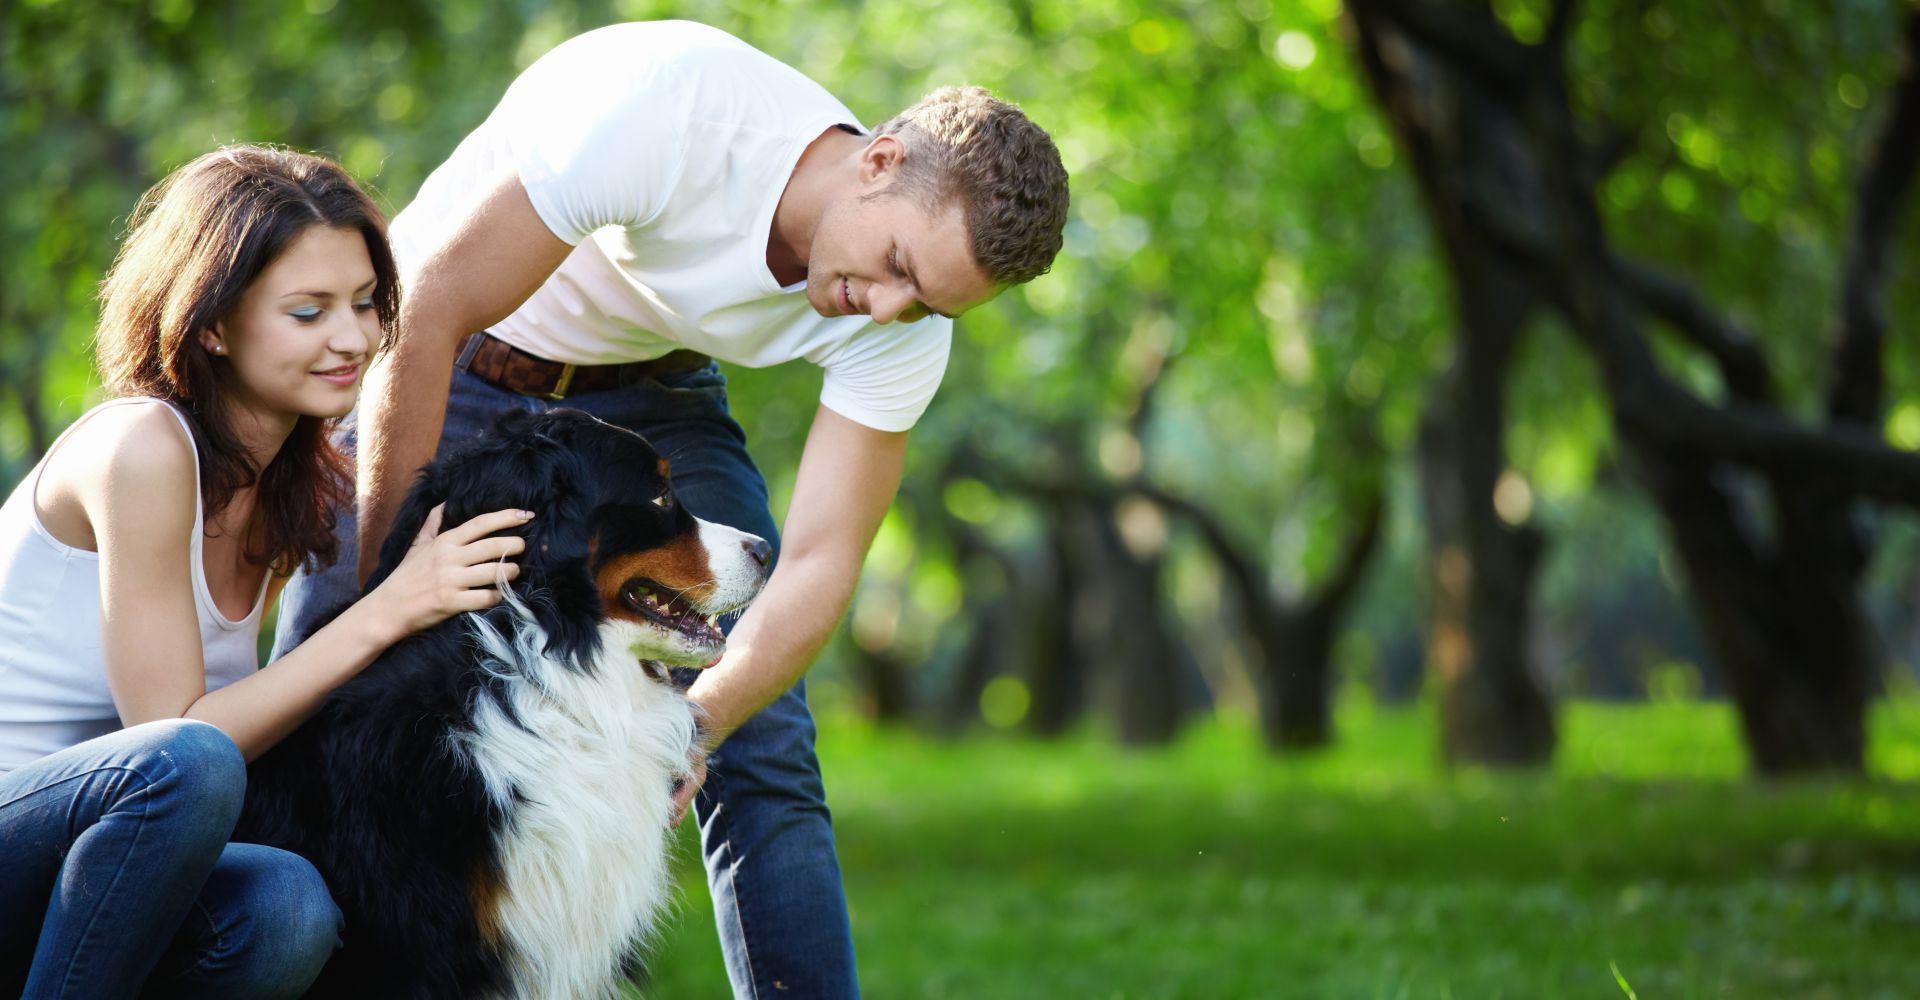 10 reasons animal lovers make the best relationship partners